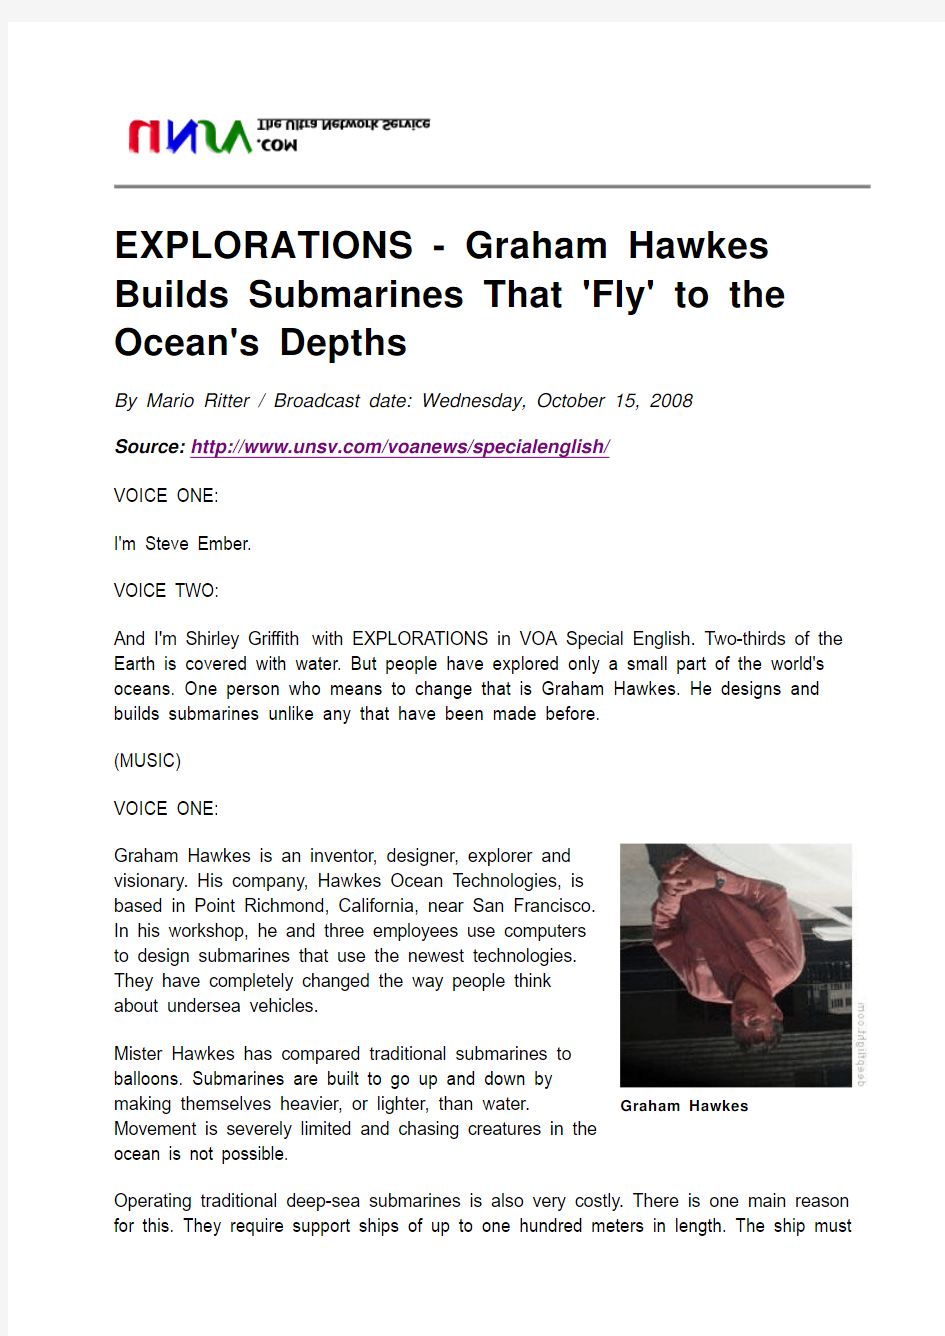 EXPLORATIONS - Graham Hawkes Builds Submarines That 'Fly' to the Ocean's Depths